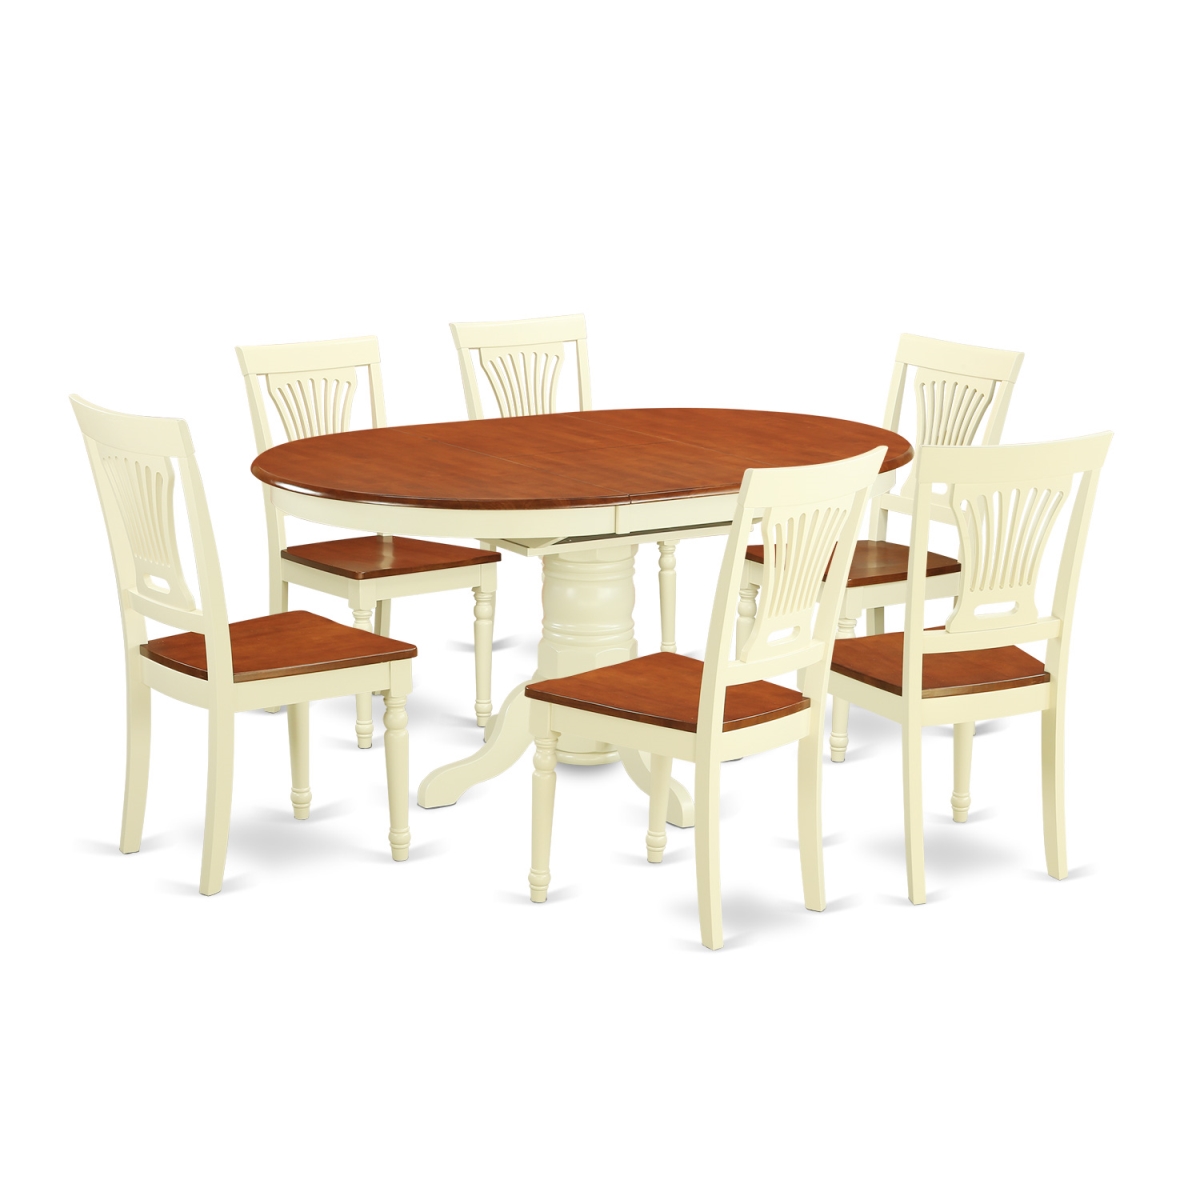 Picture of East West Furniture AVPL7-WHI-W Set Table with Leaf & 6 Wood Seat Chairs, Buttermilk & Cherry - 7 Piece